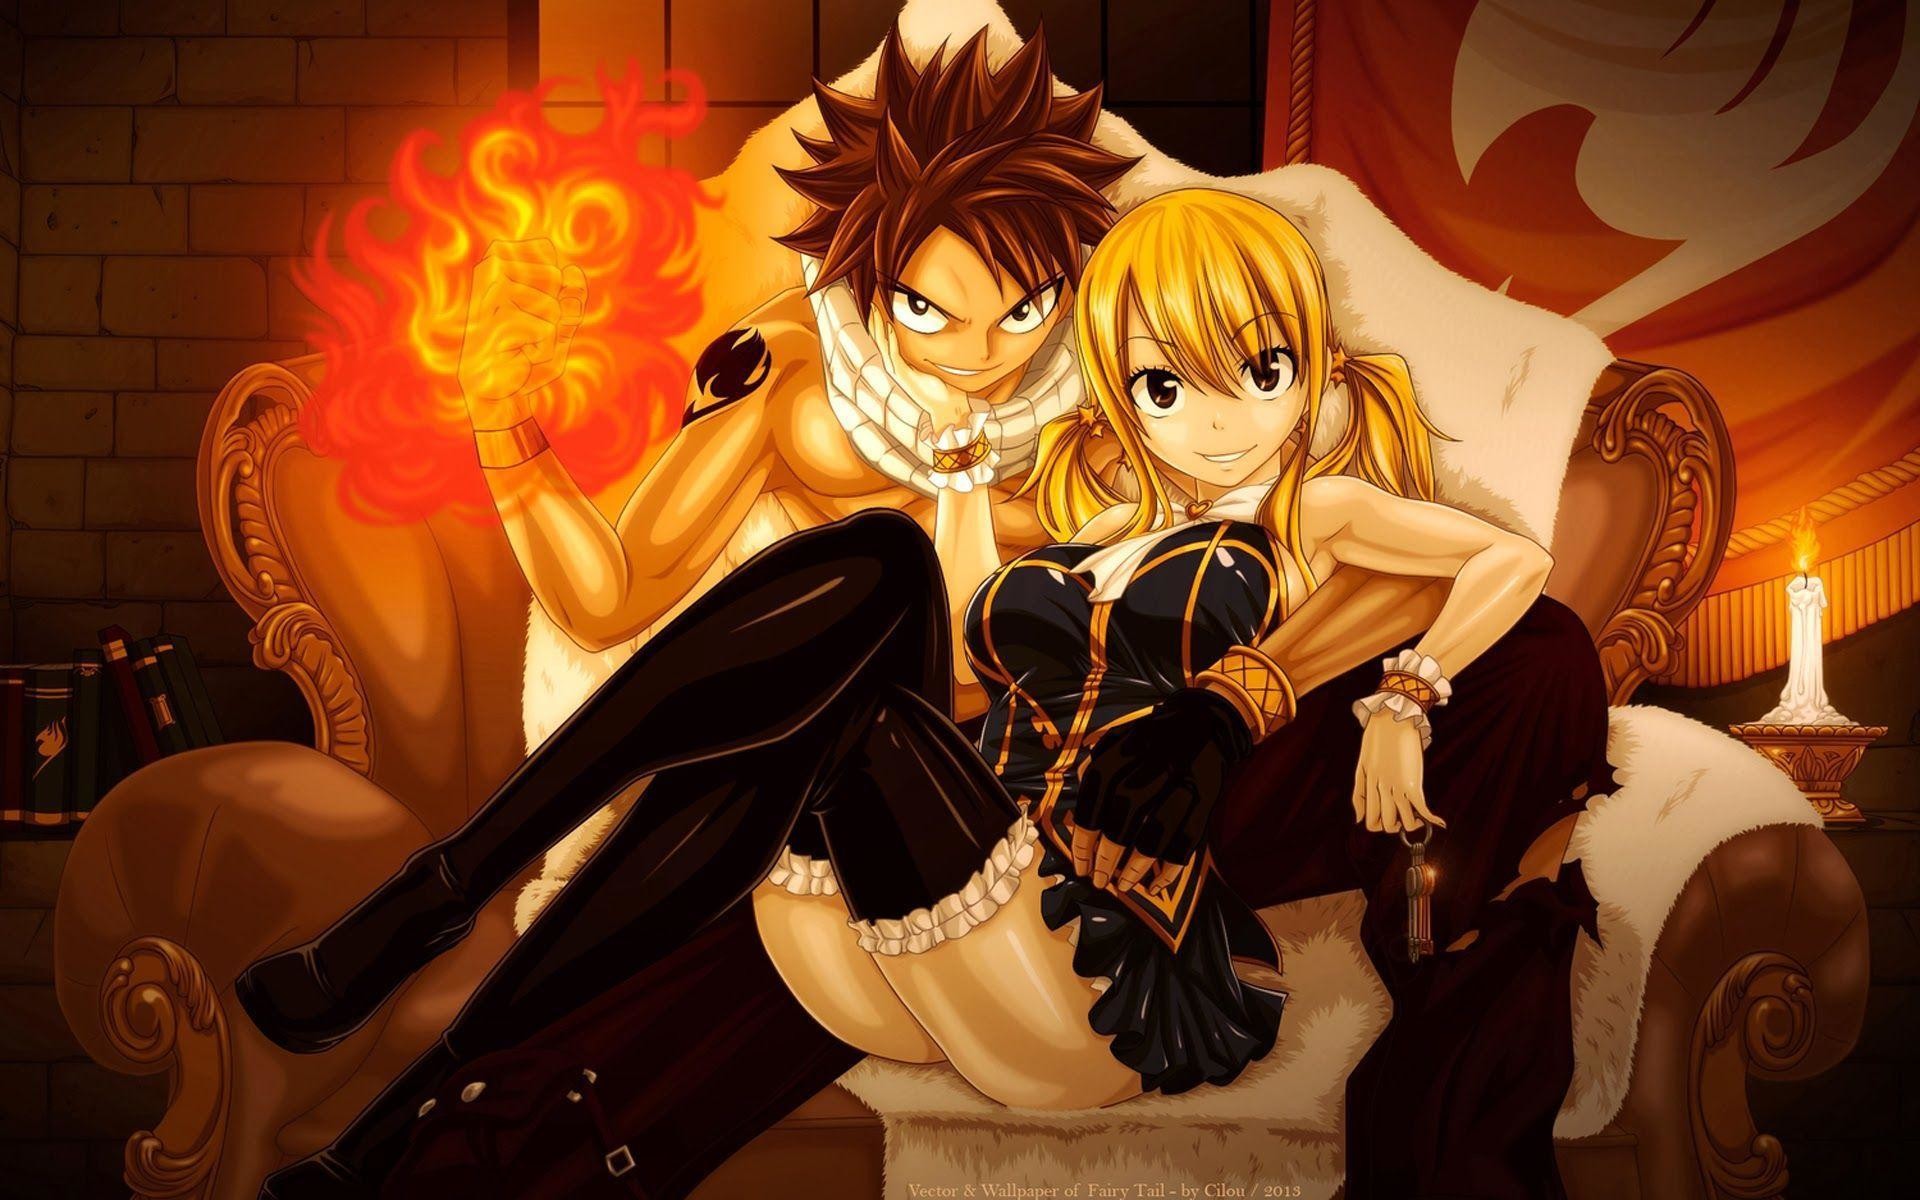 1920x1200 Wallpapers For > Fairy Tail Natsu Wallpaper Hd